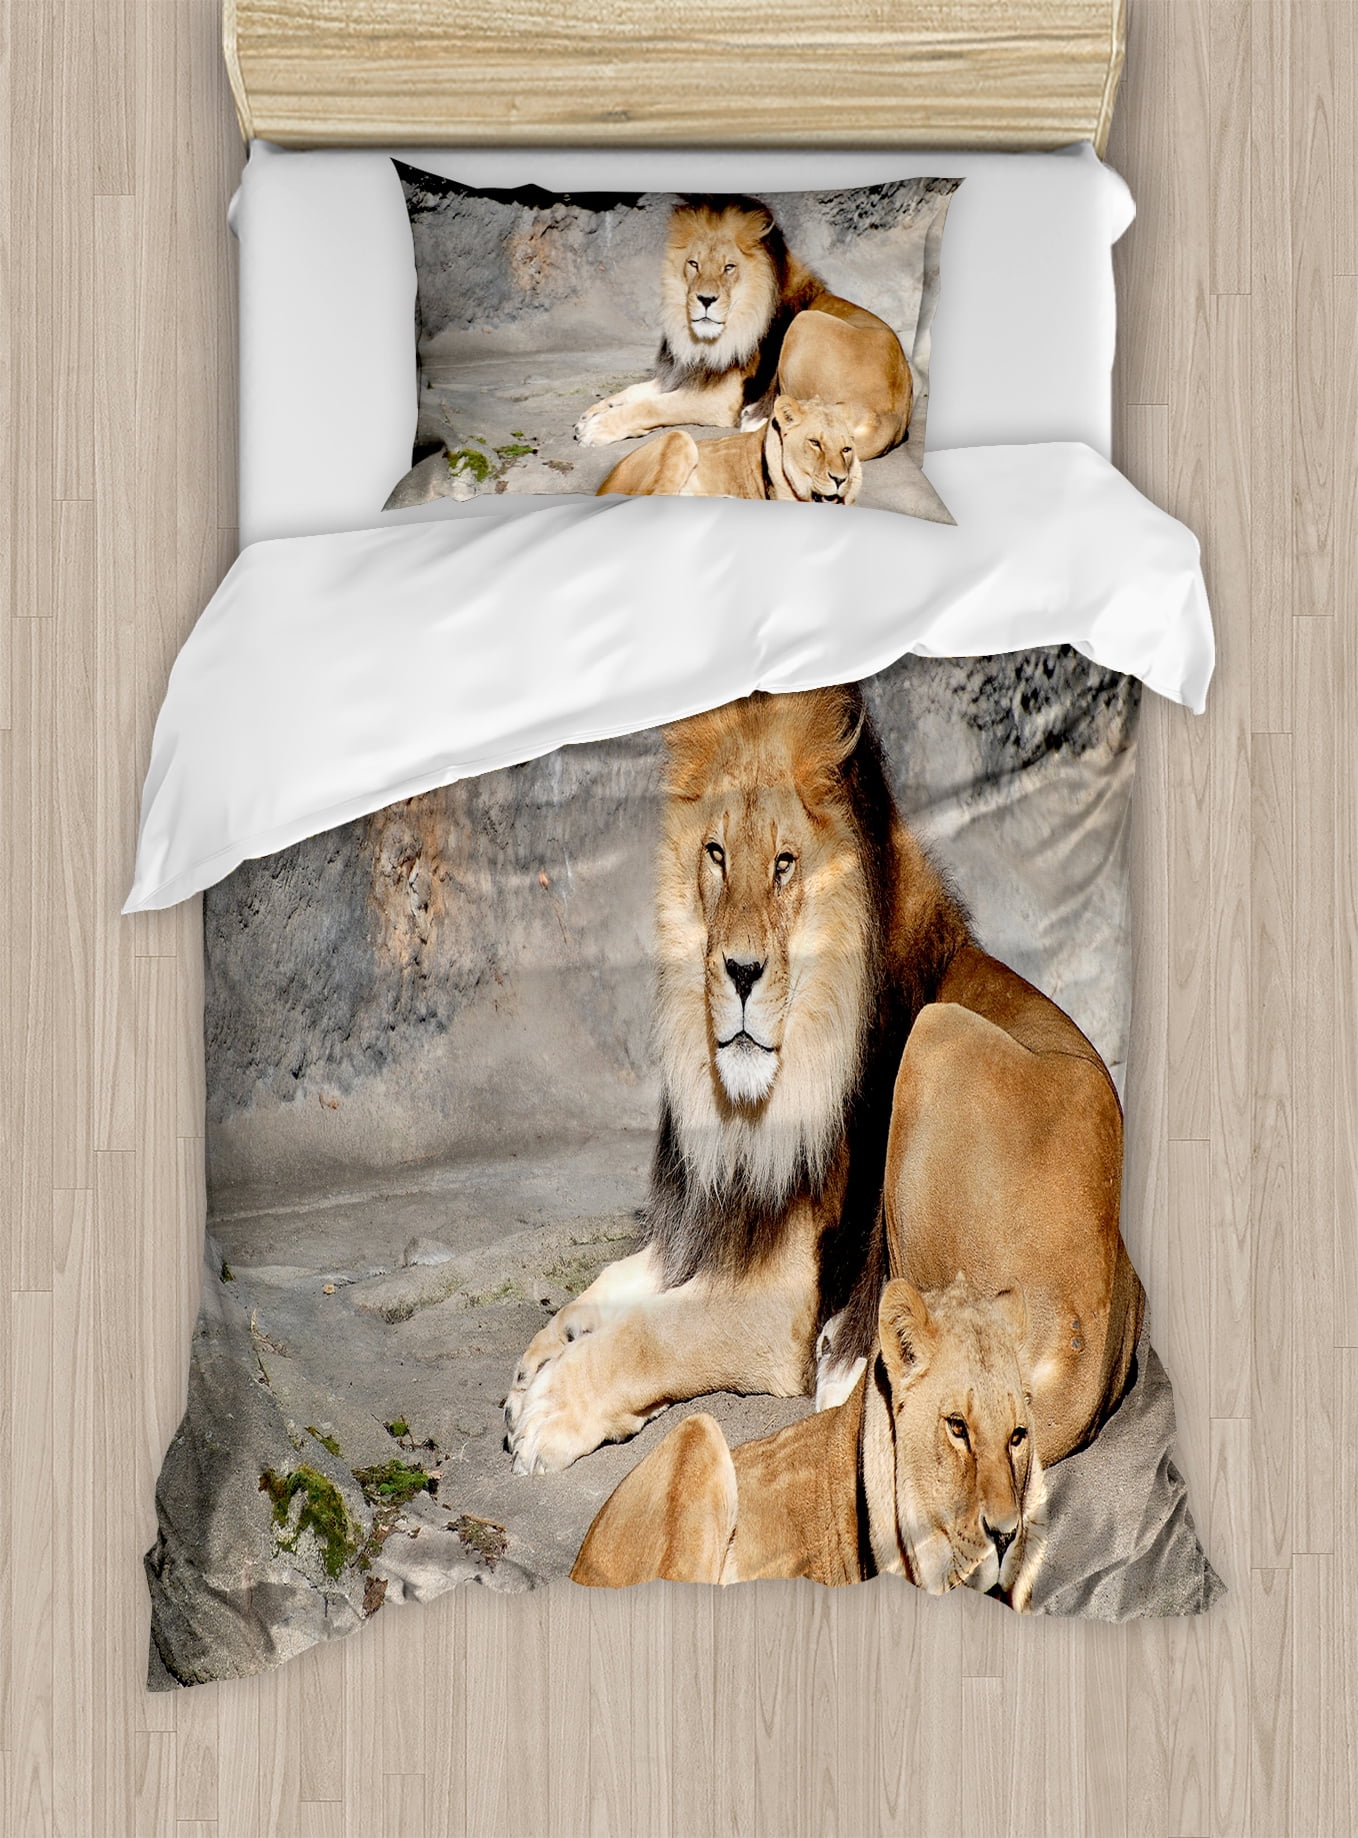 Zoo Duvet Cover Set Male And Female Lions Basking In The Sun Wild